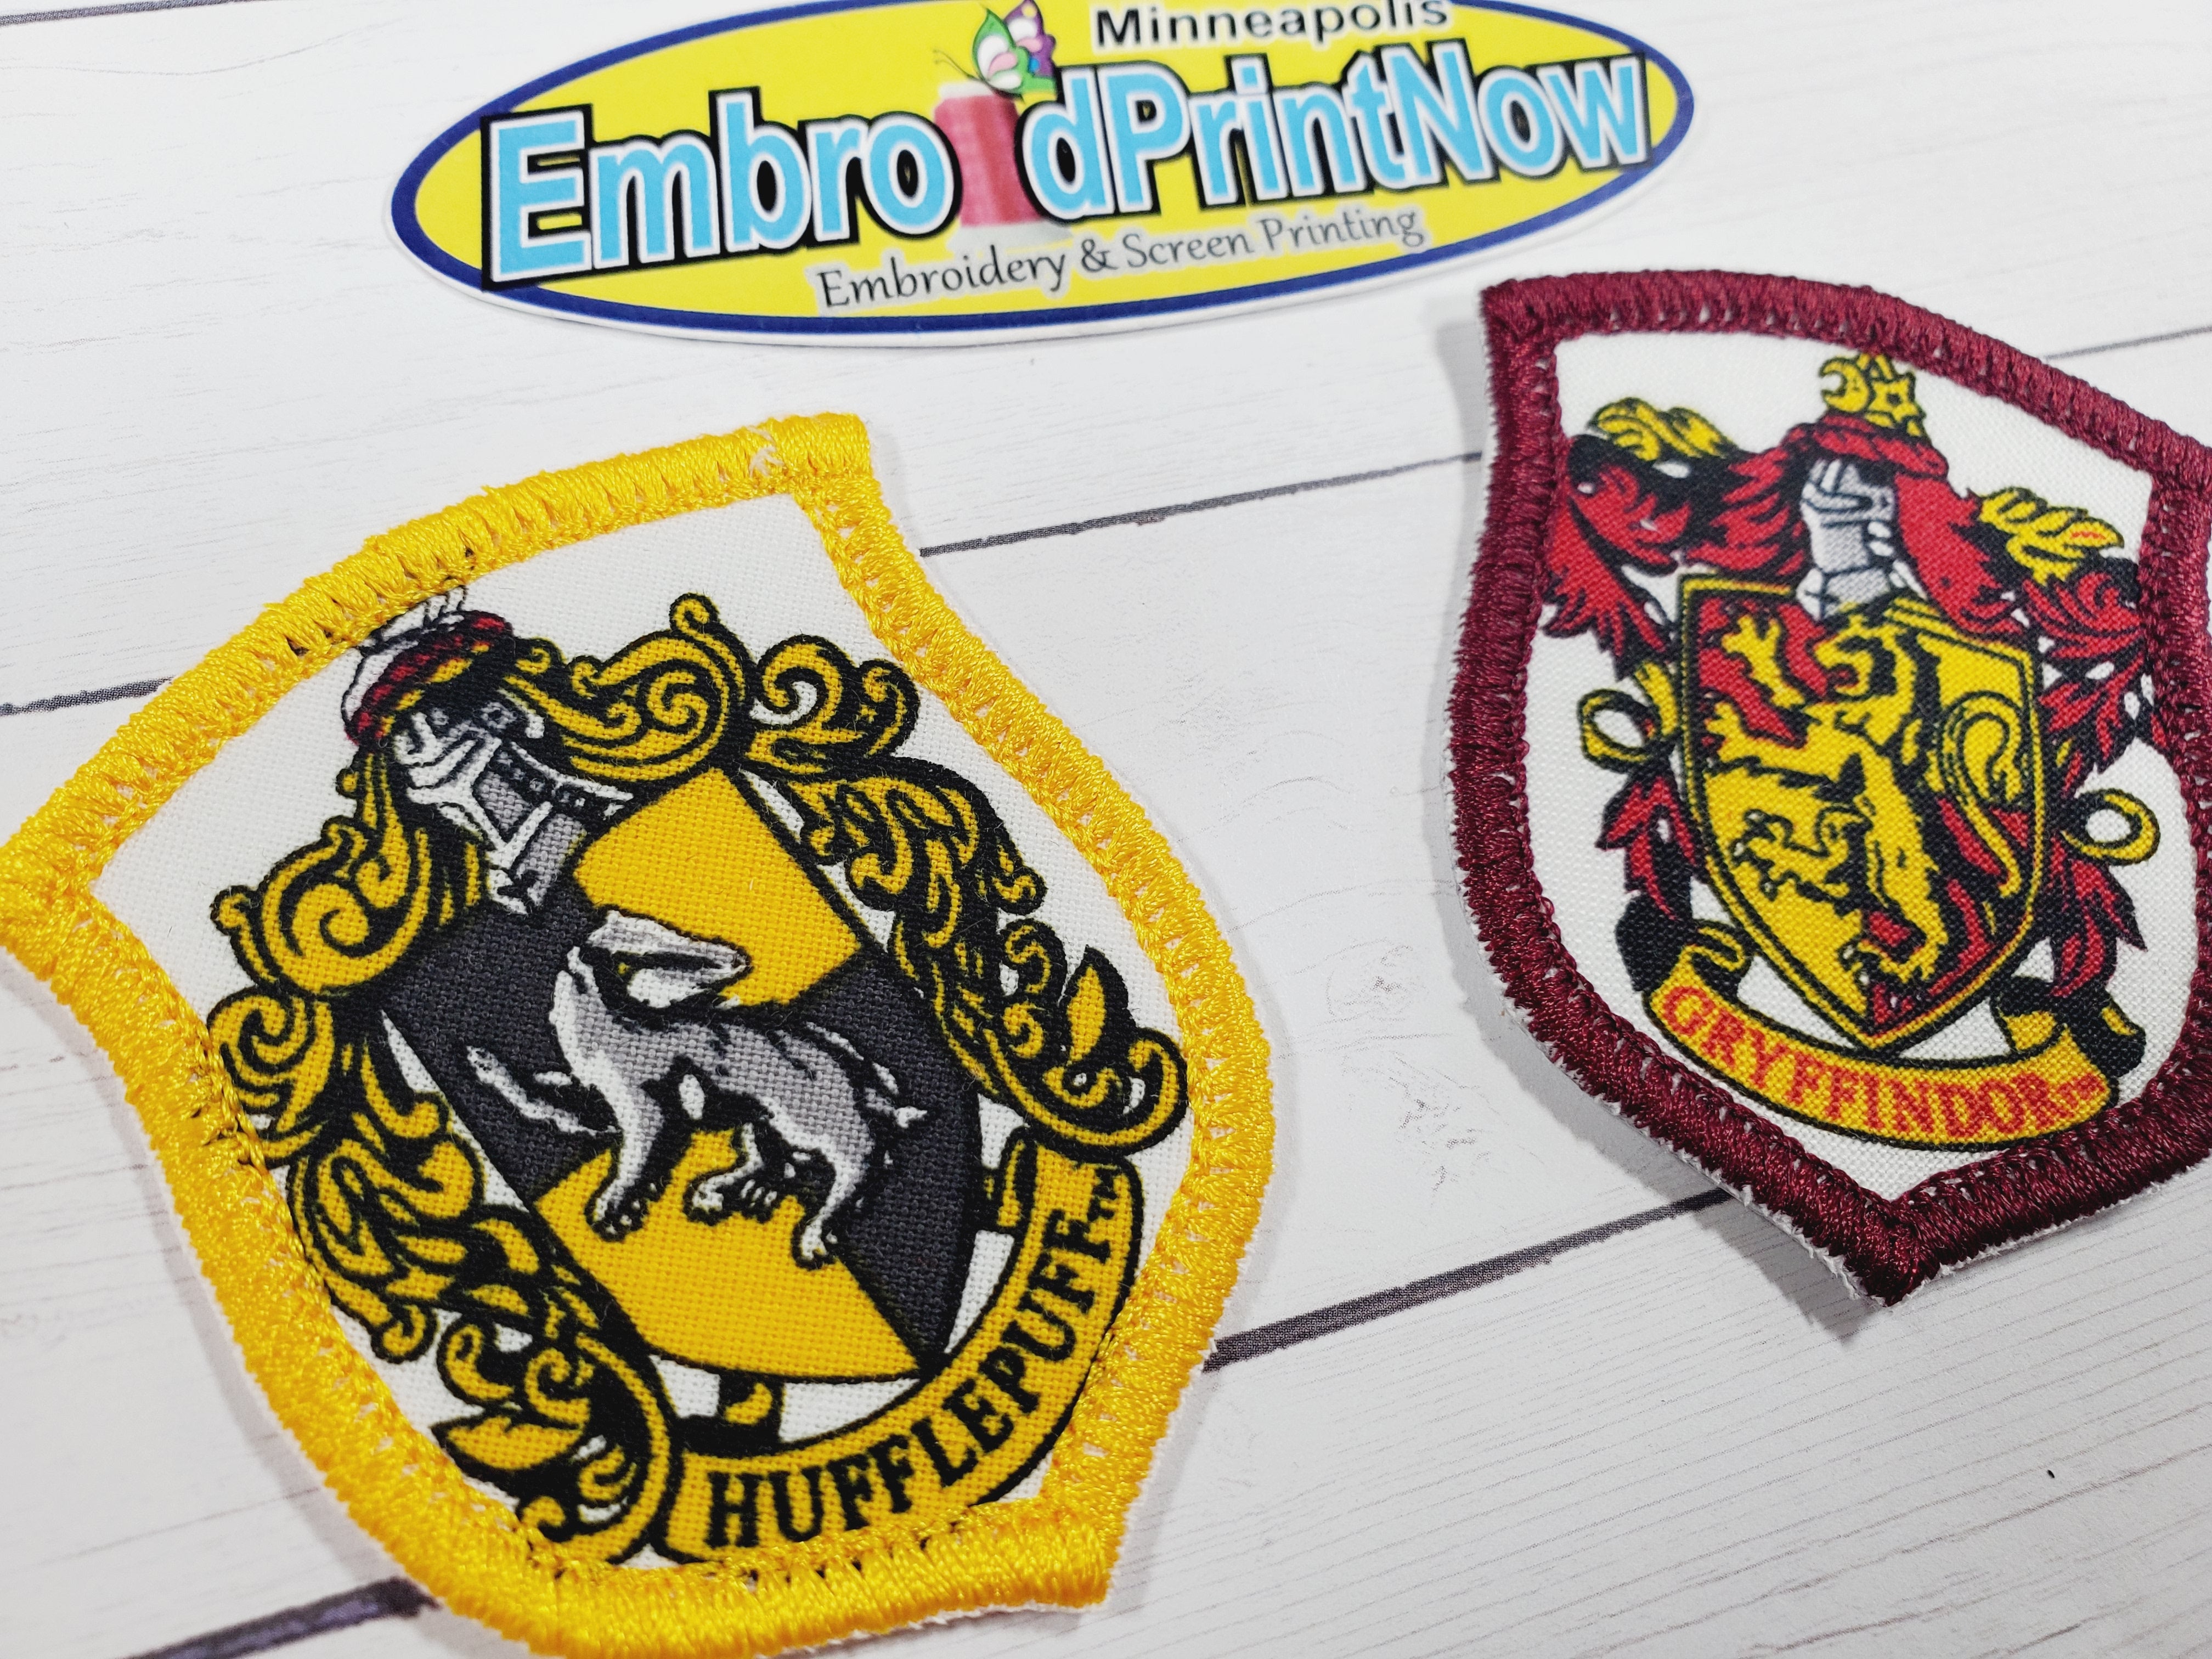 Gryffindor 4 Embroid Hogwarts Slytherin Now Iron-on Set of Houses Print patch – of Hufflep